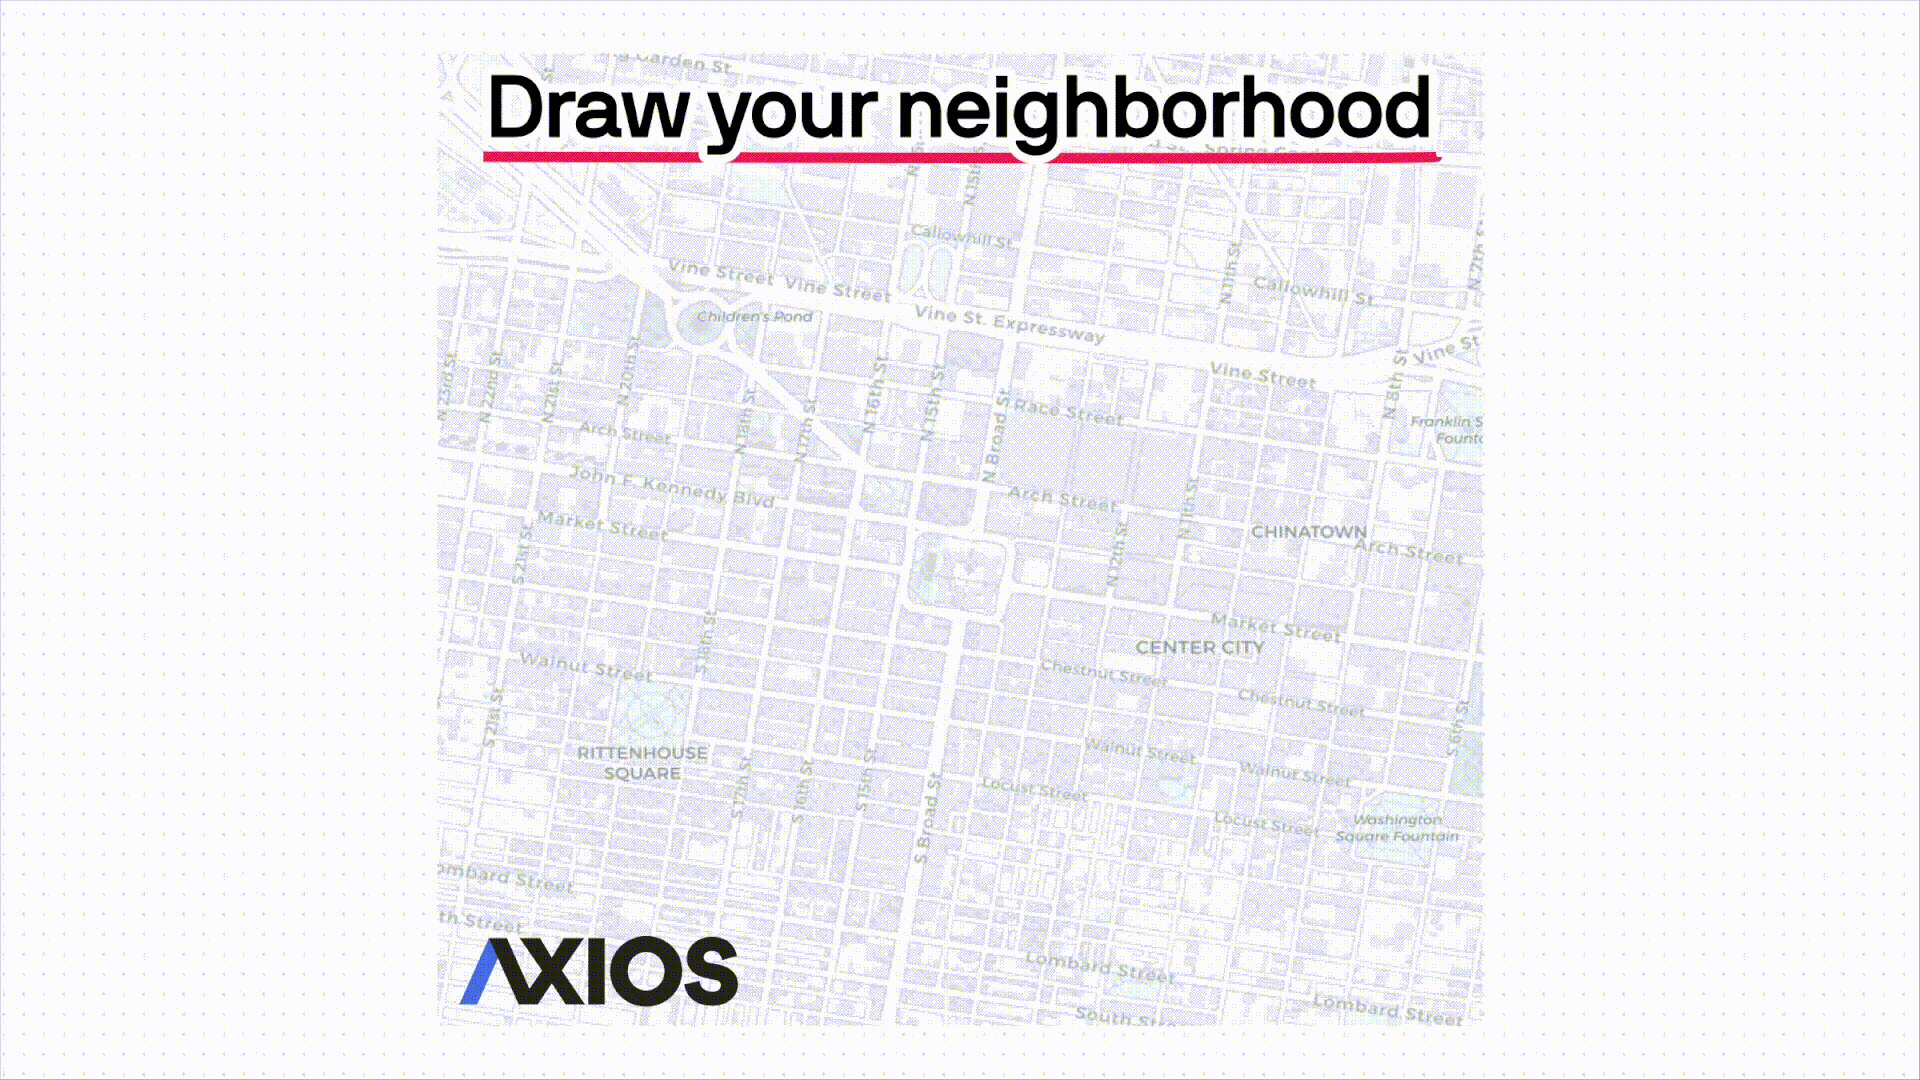 Gif of the text "Draw your neighborhood" with a map being drawn. 